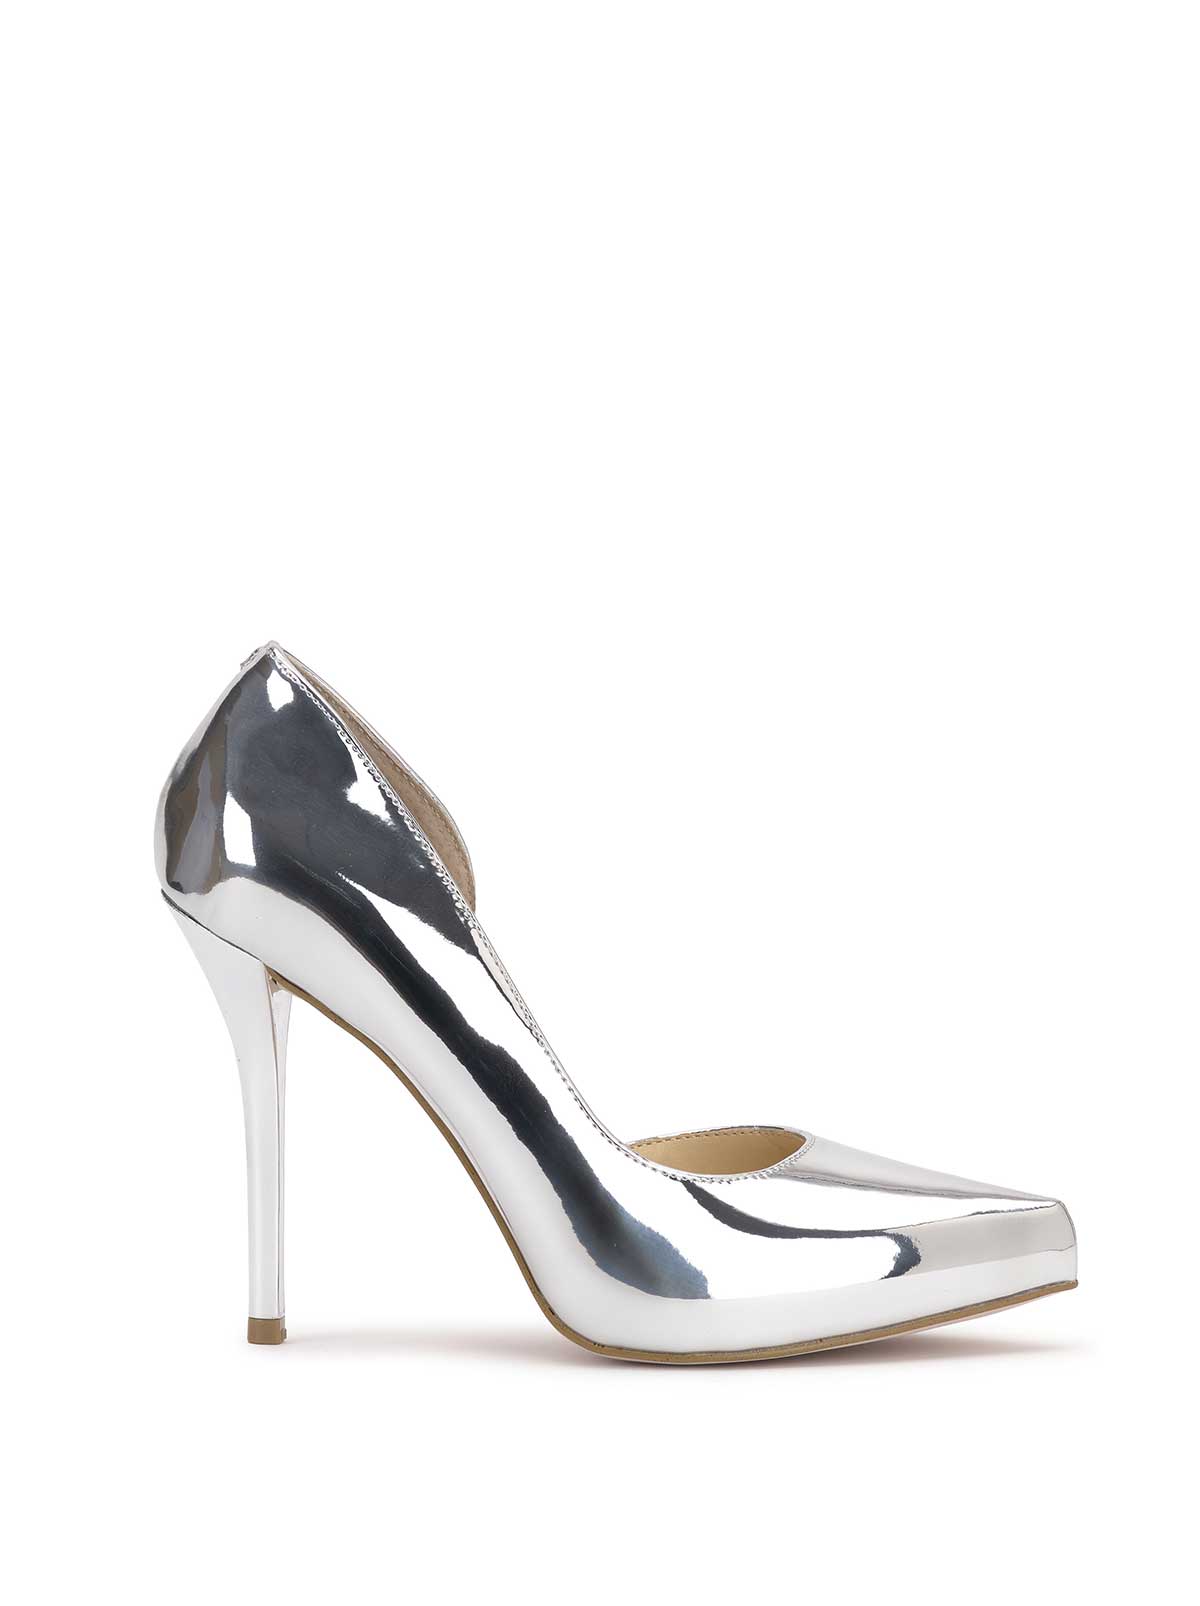 Therapy Shoes Temptress Silver | Women's Heels | Pumps | Stiletto | Flare  Heel